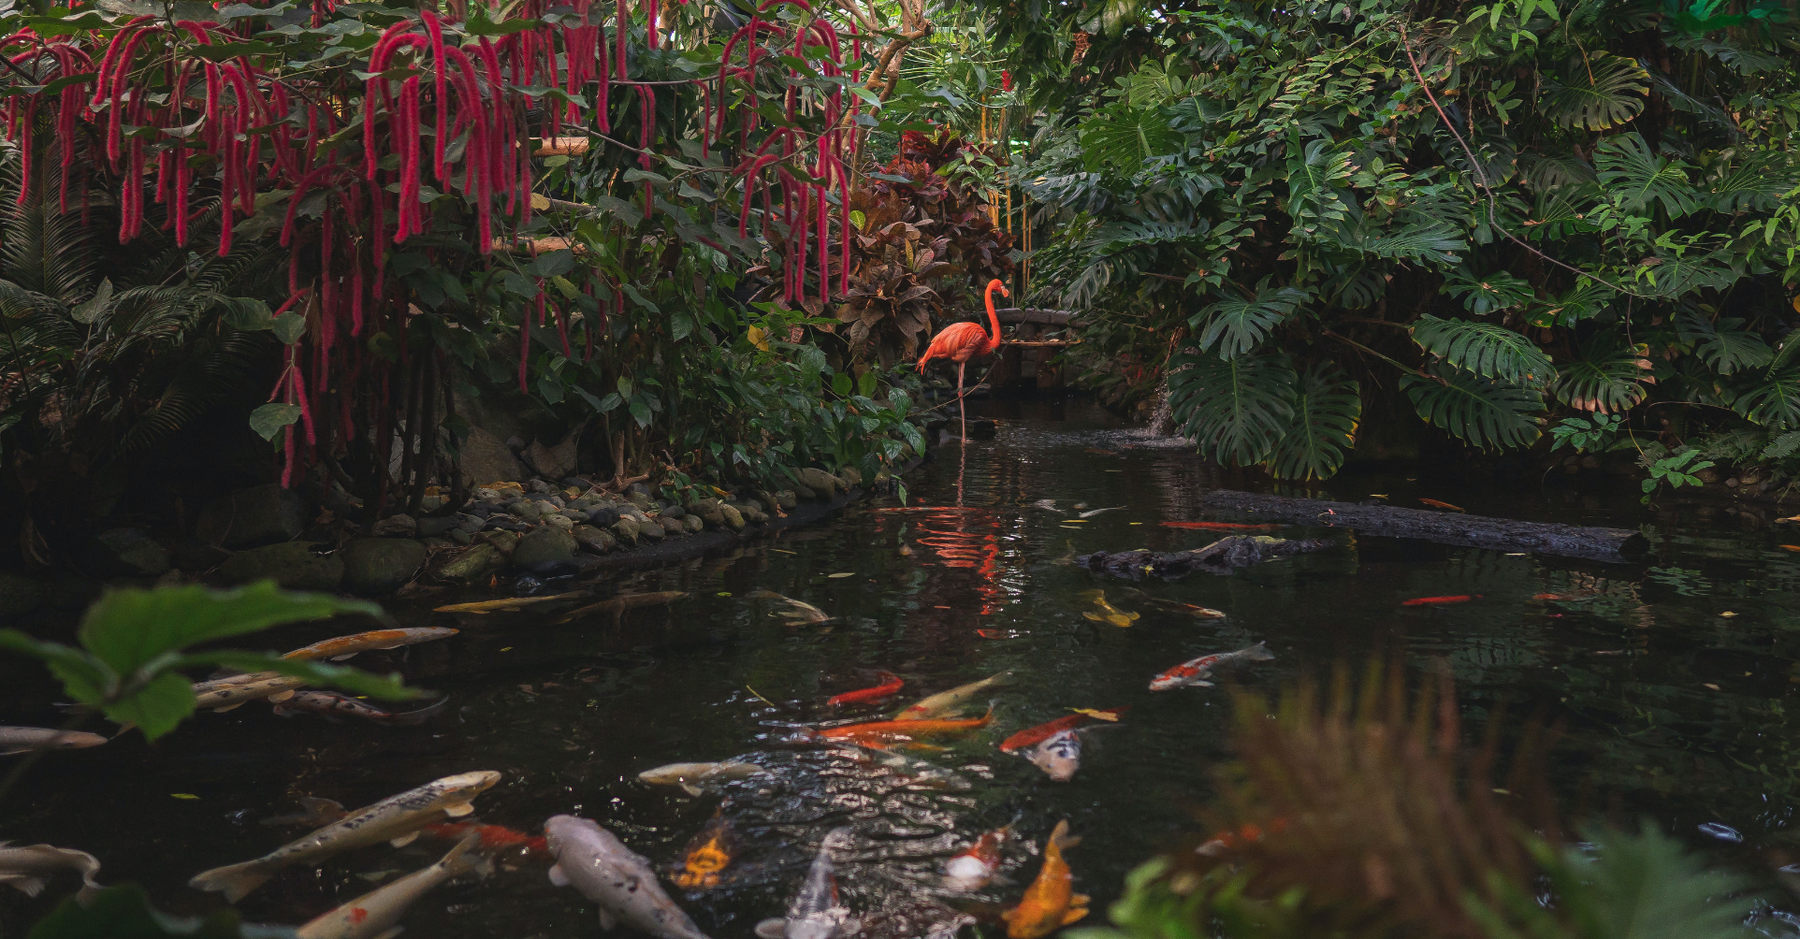 The Victoria Butterfly Gardens in Full Bloom with a Flamingo standing in a pond with Koi Fish swimming around